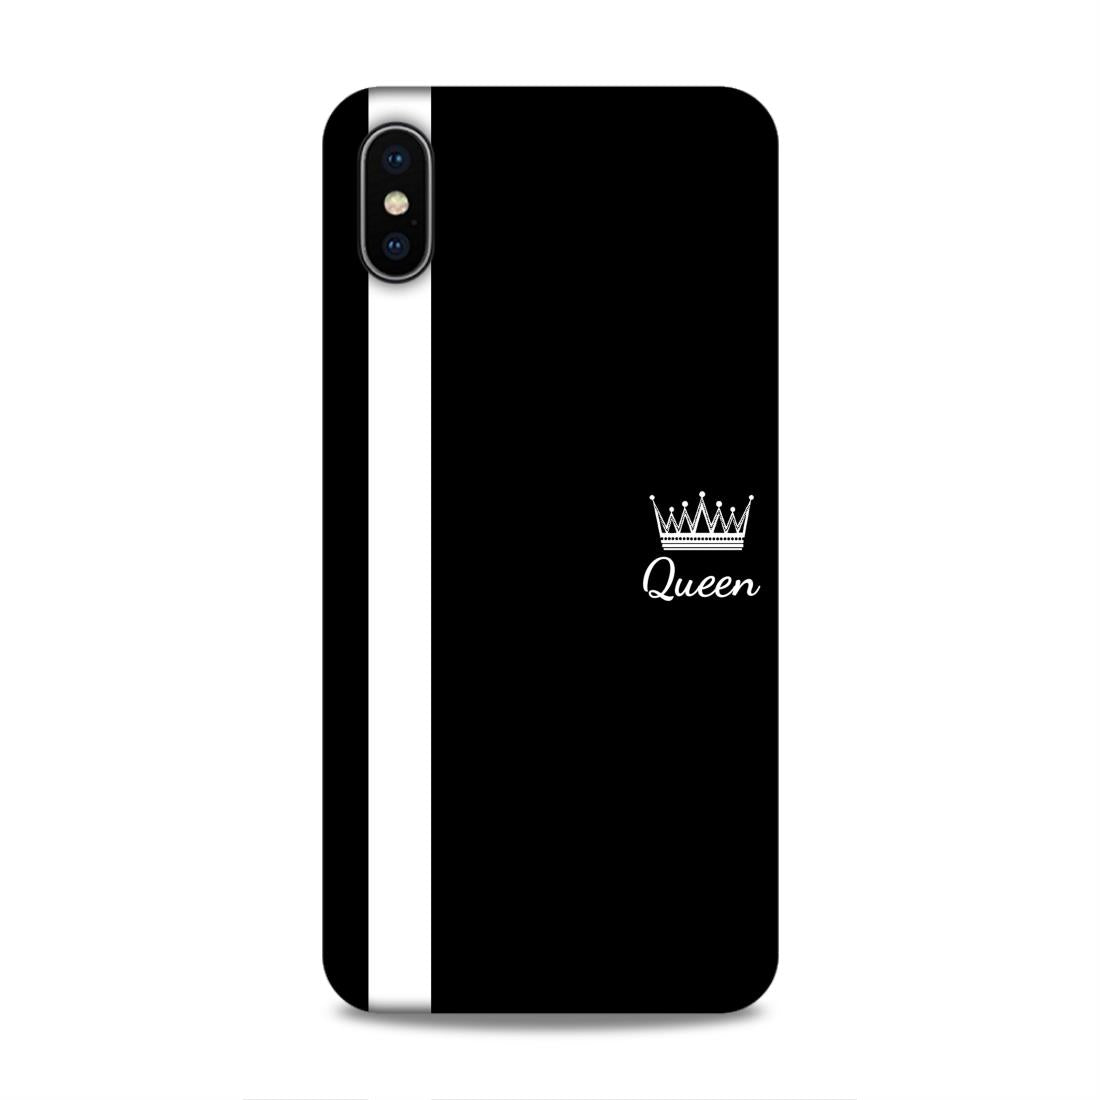 Queen Hard Back Case For Apple iPhone XS Max